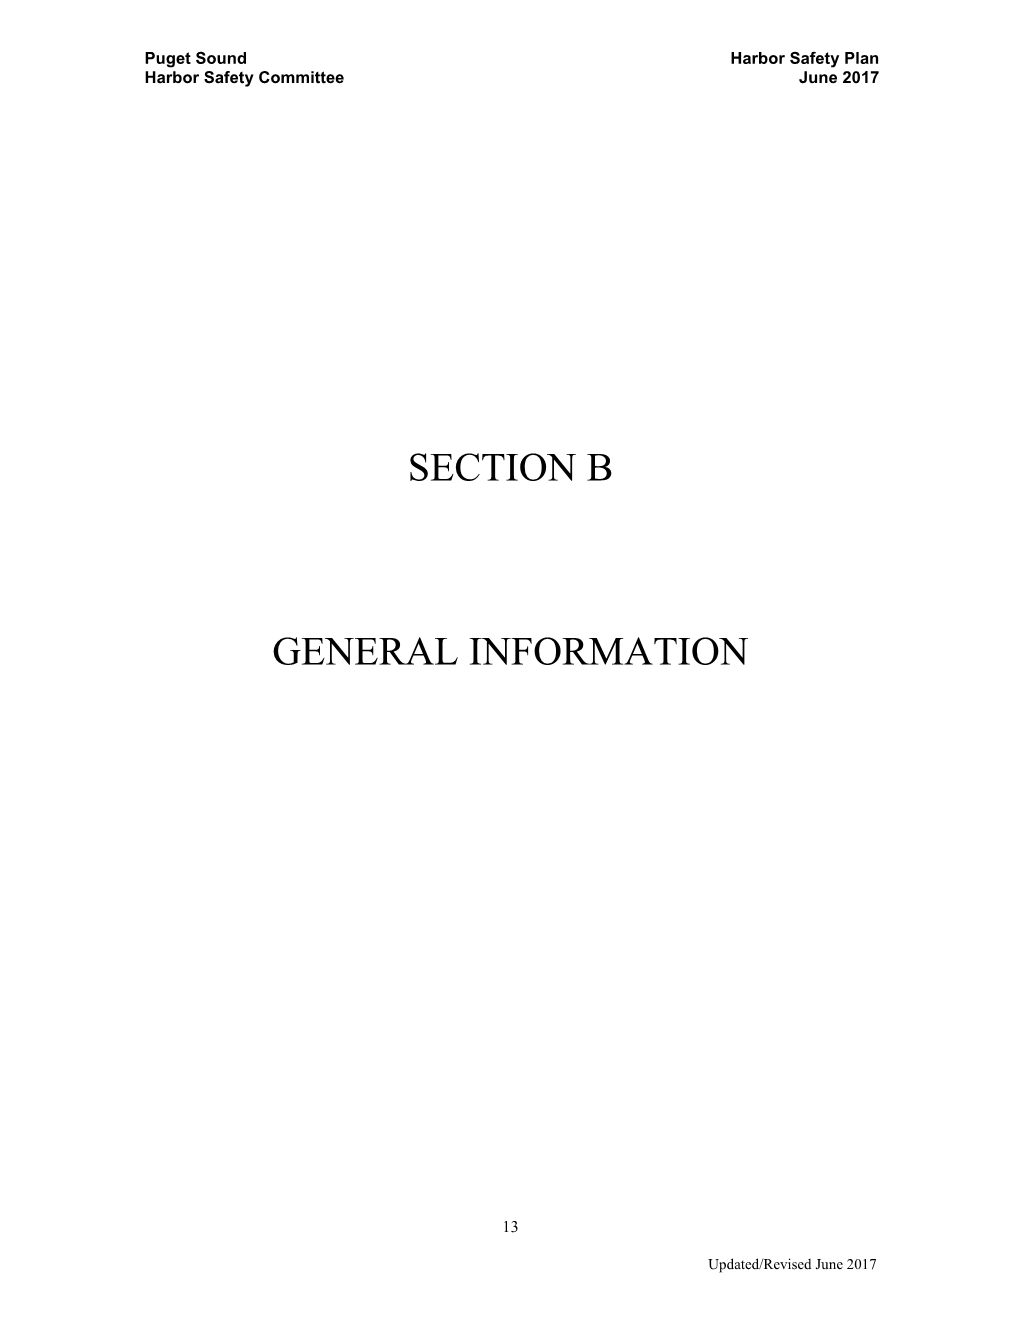 Harbor Safety Plan Section B -- General Information